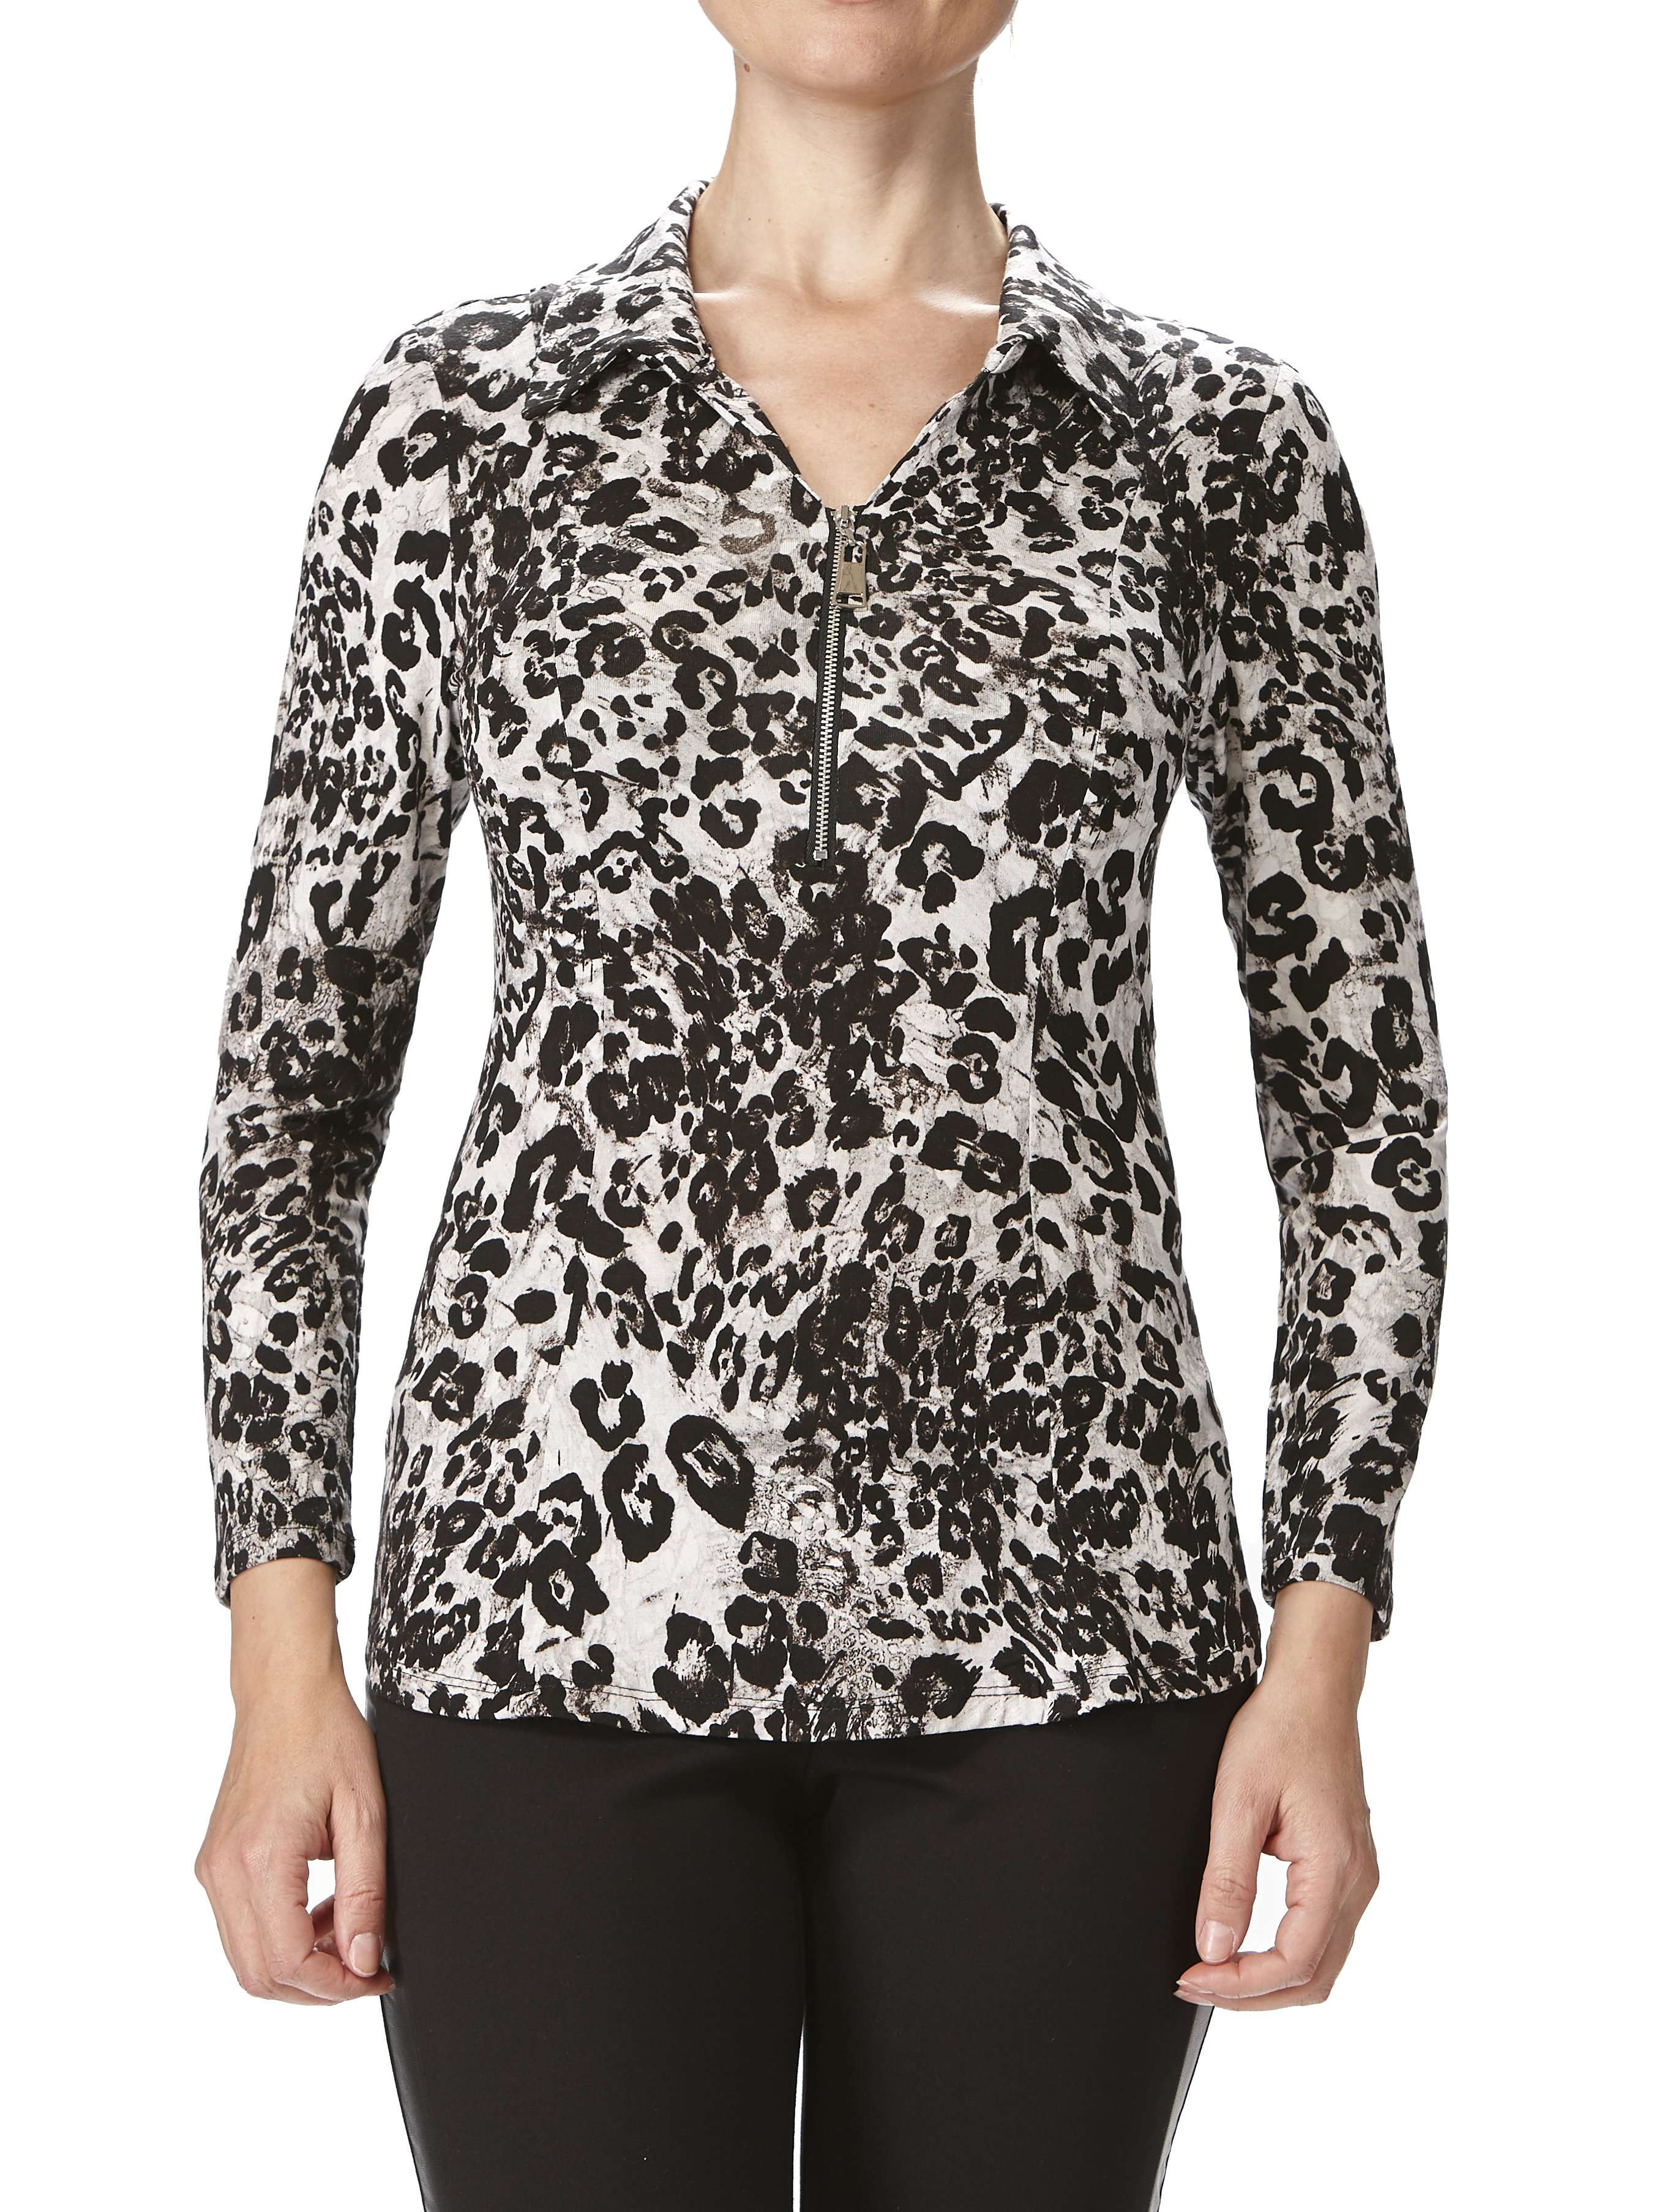 Women's Blouse Animal Print Soft Stretch Fabric - Made in Canada -Exclusive Yvonne Marie - Yvonne Marie - Yvonne Marie